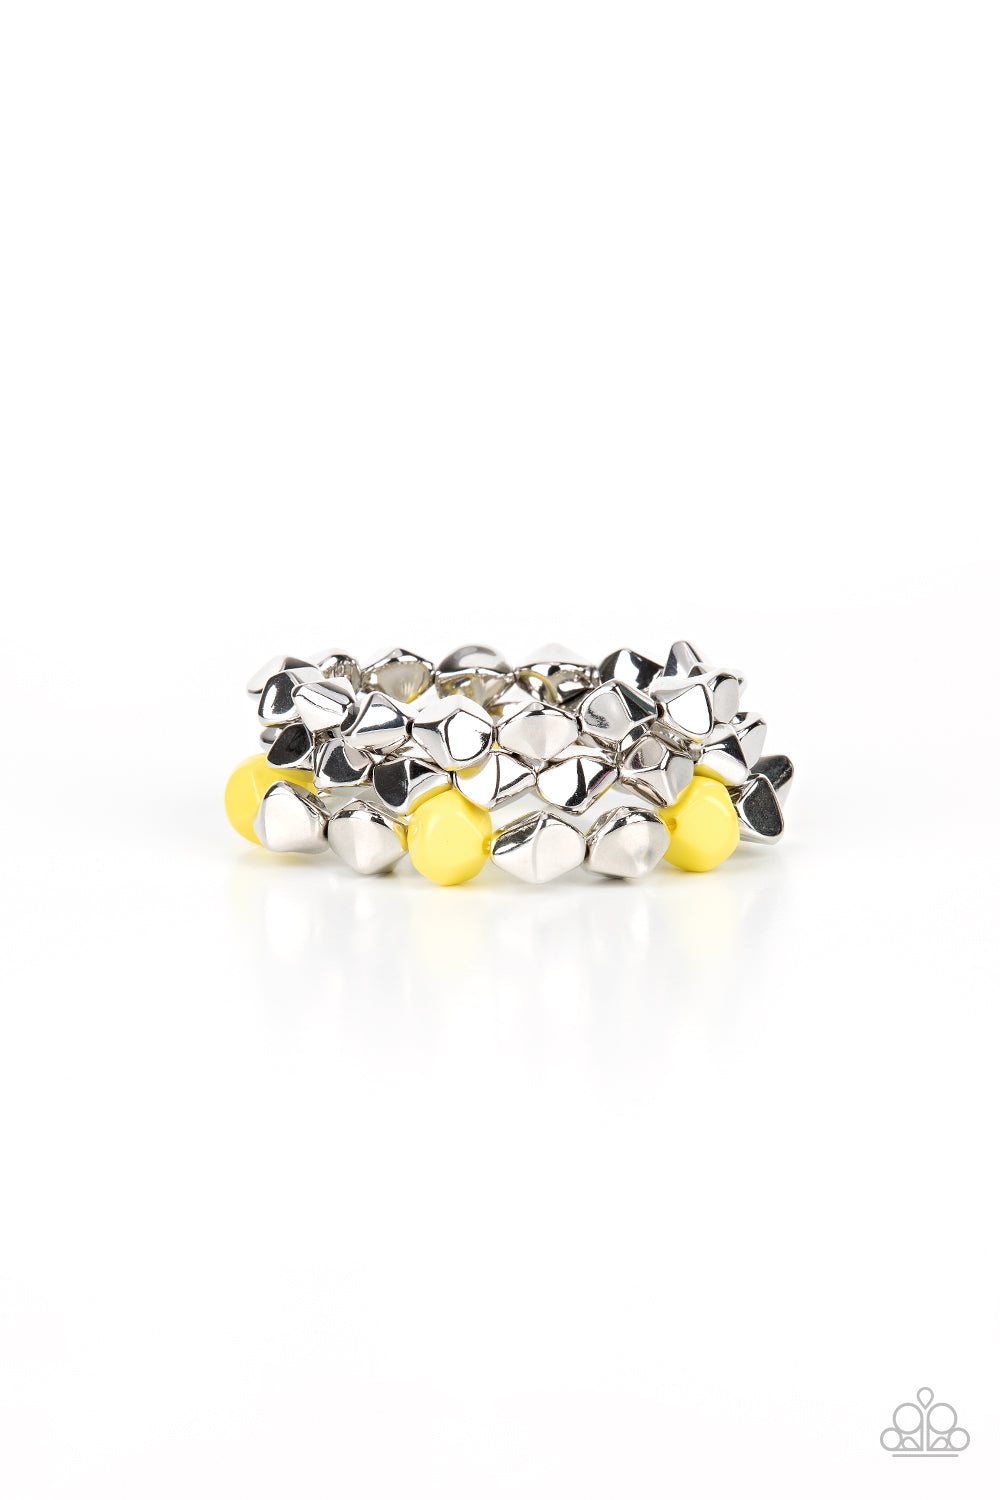 A Perfect TENACIOUS Yellow Bracelet - Paparazzi Accessories  Infused with pops of Illuminating accents, a faceted series of silver beads are threaded along stretchy bands around the wrist for a flashy fashion.  Sold as one set of three bracelets.